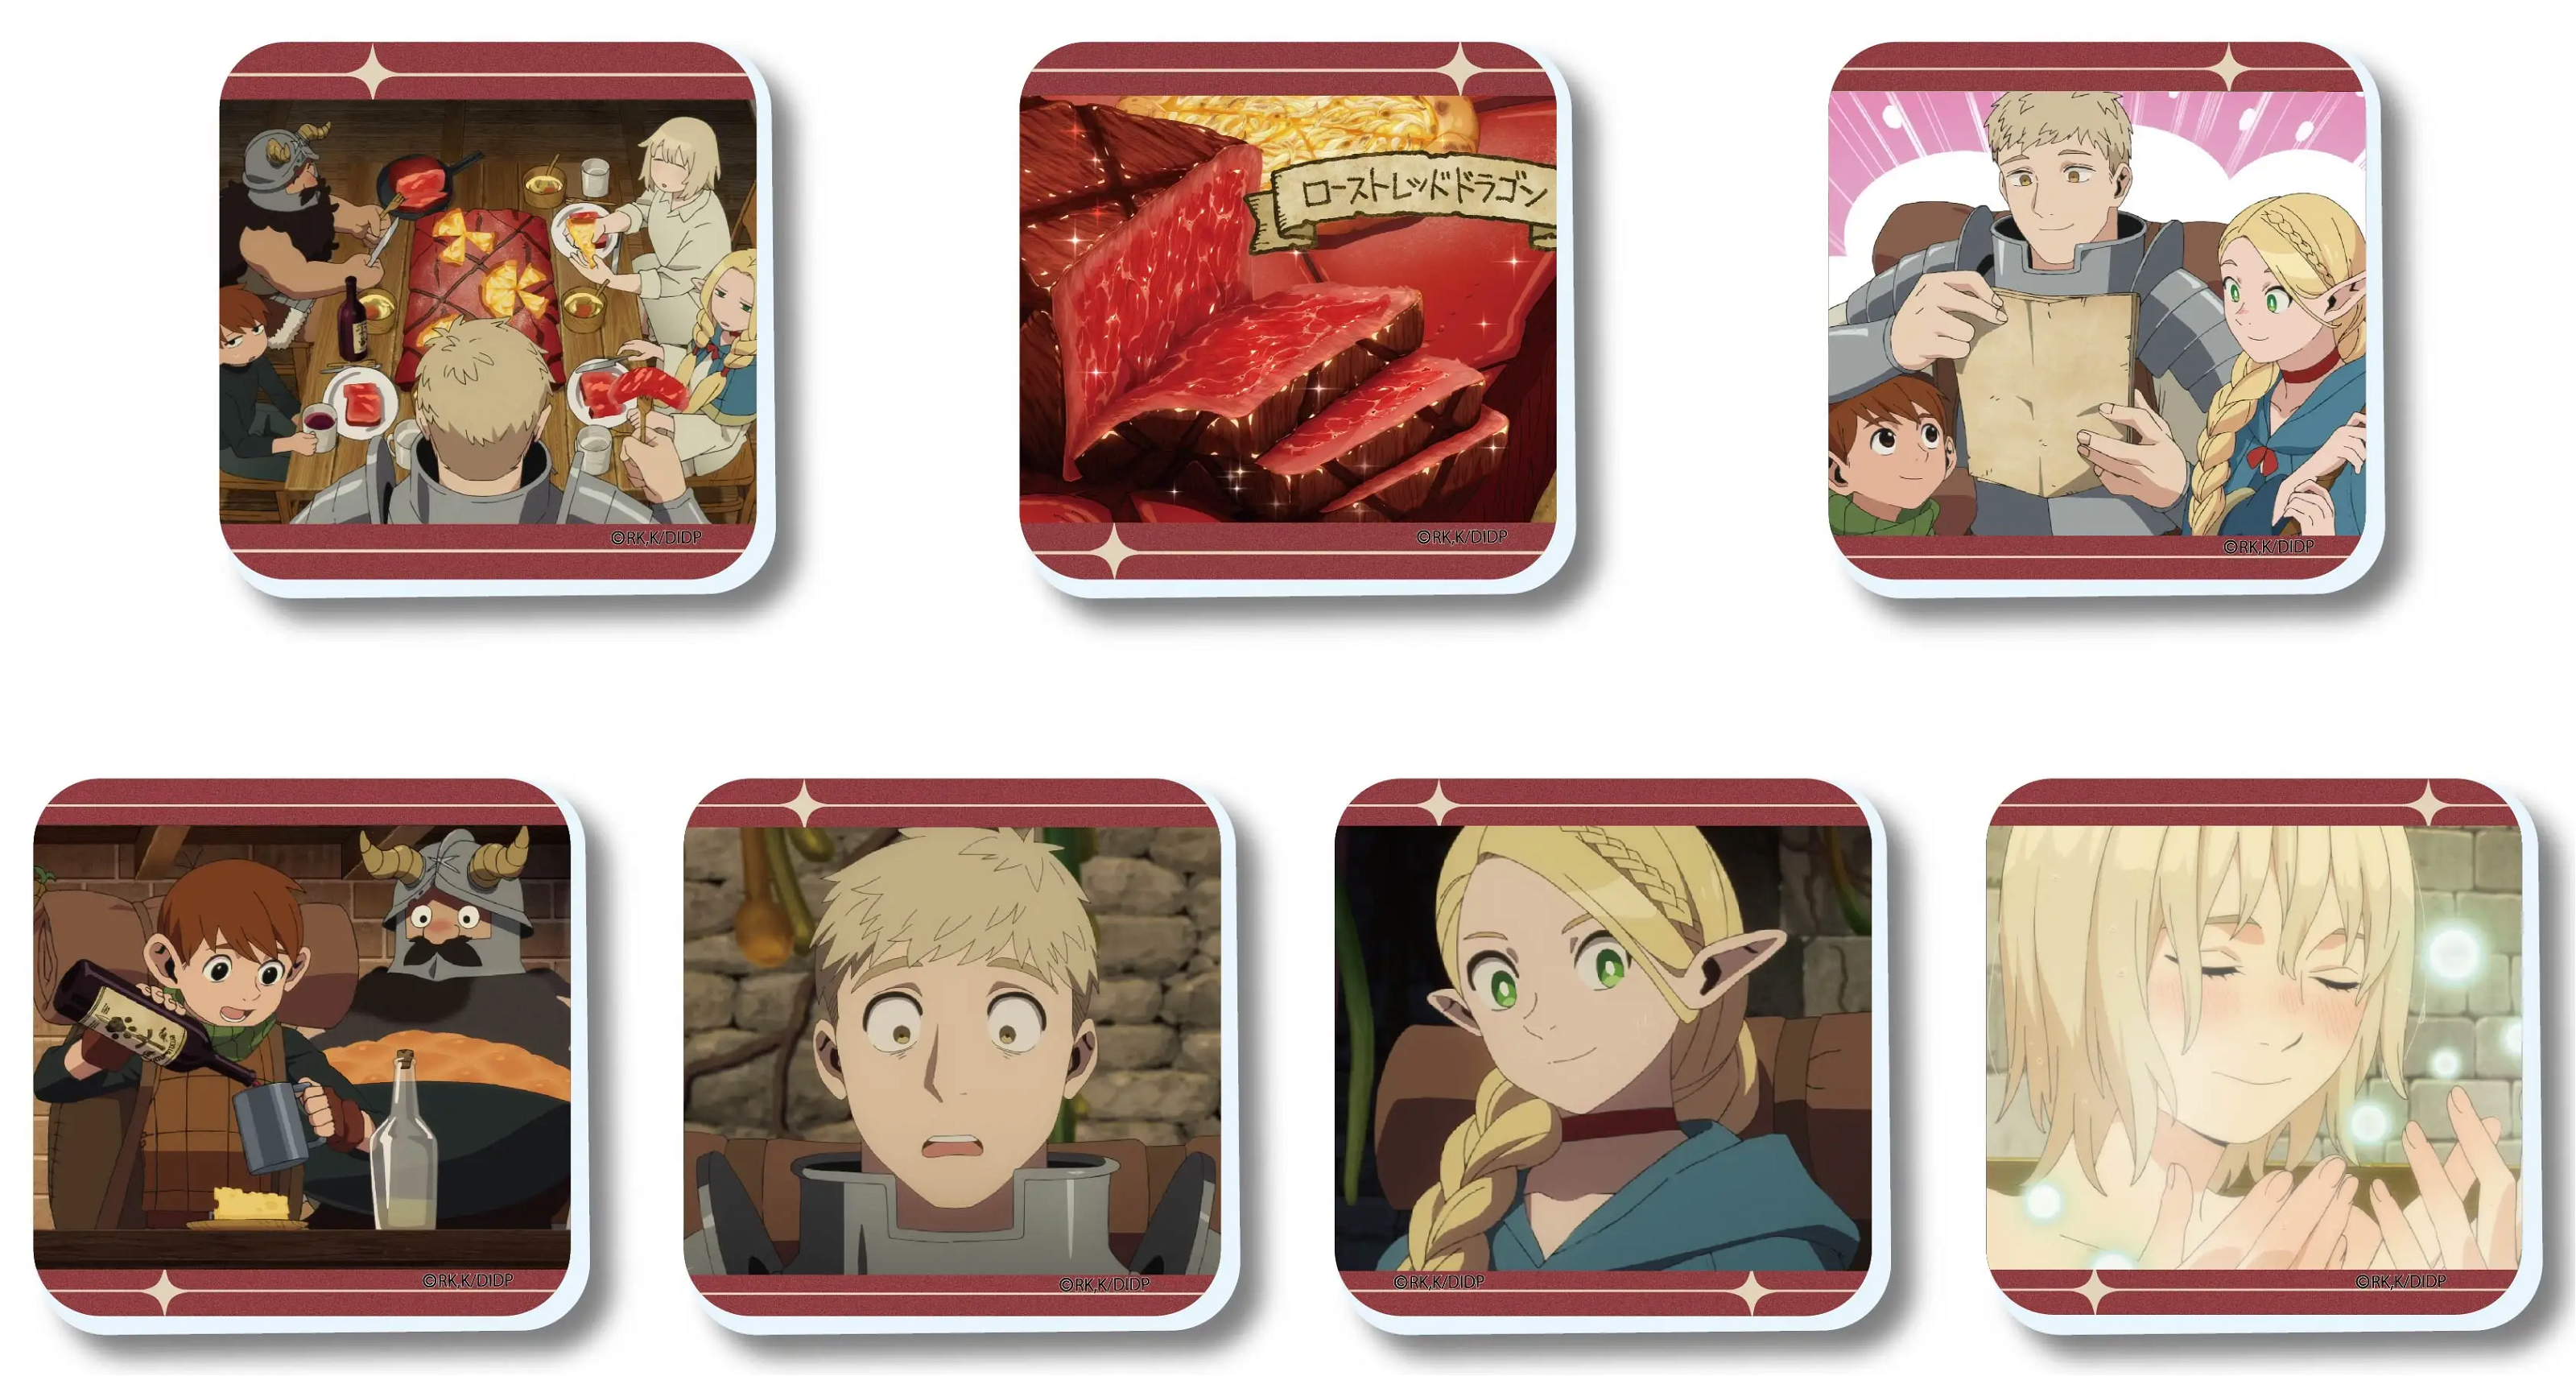 Delicious In Dungeon Memorial Acrylic Magnet (Set of 7 Packs) Bell Fine